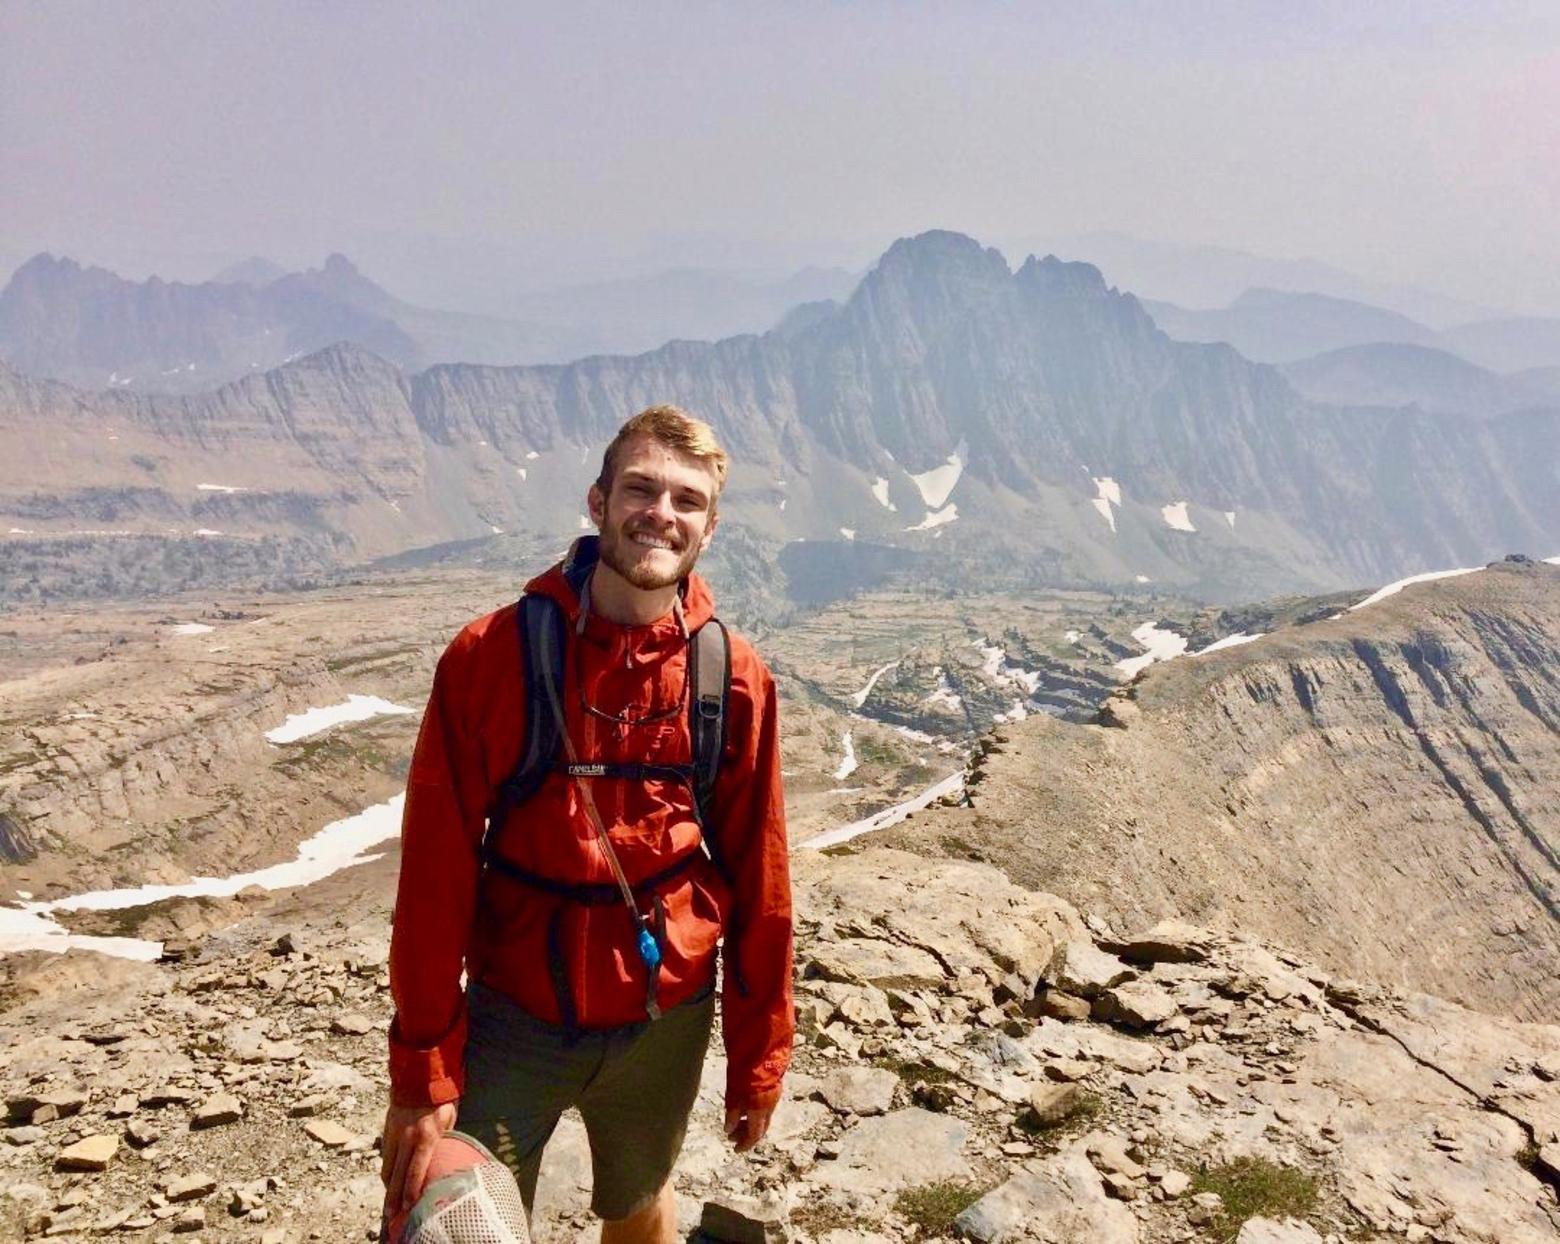 Ben Williamson believes more progress for conservation can be made if the framing of issues are approached differently. He wants to place the Northern Rockies Conservation Cooperative at the center of such discussions. Can it work?  Photo courtesy Ben Williamson